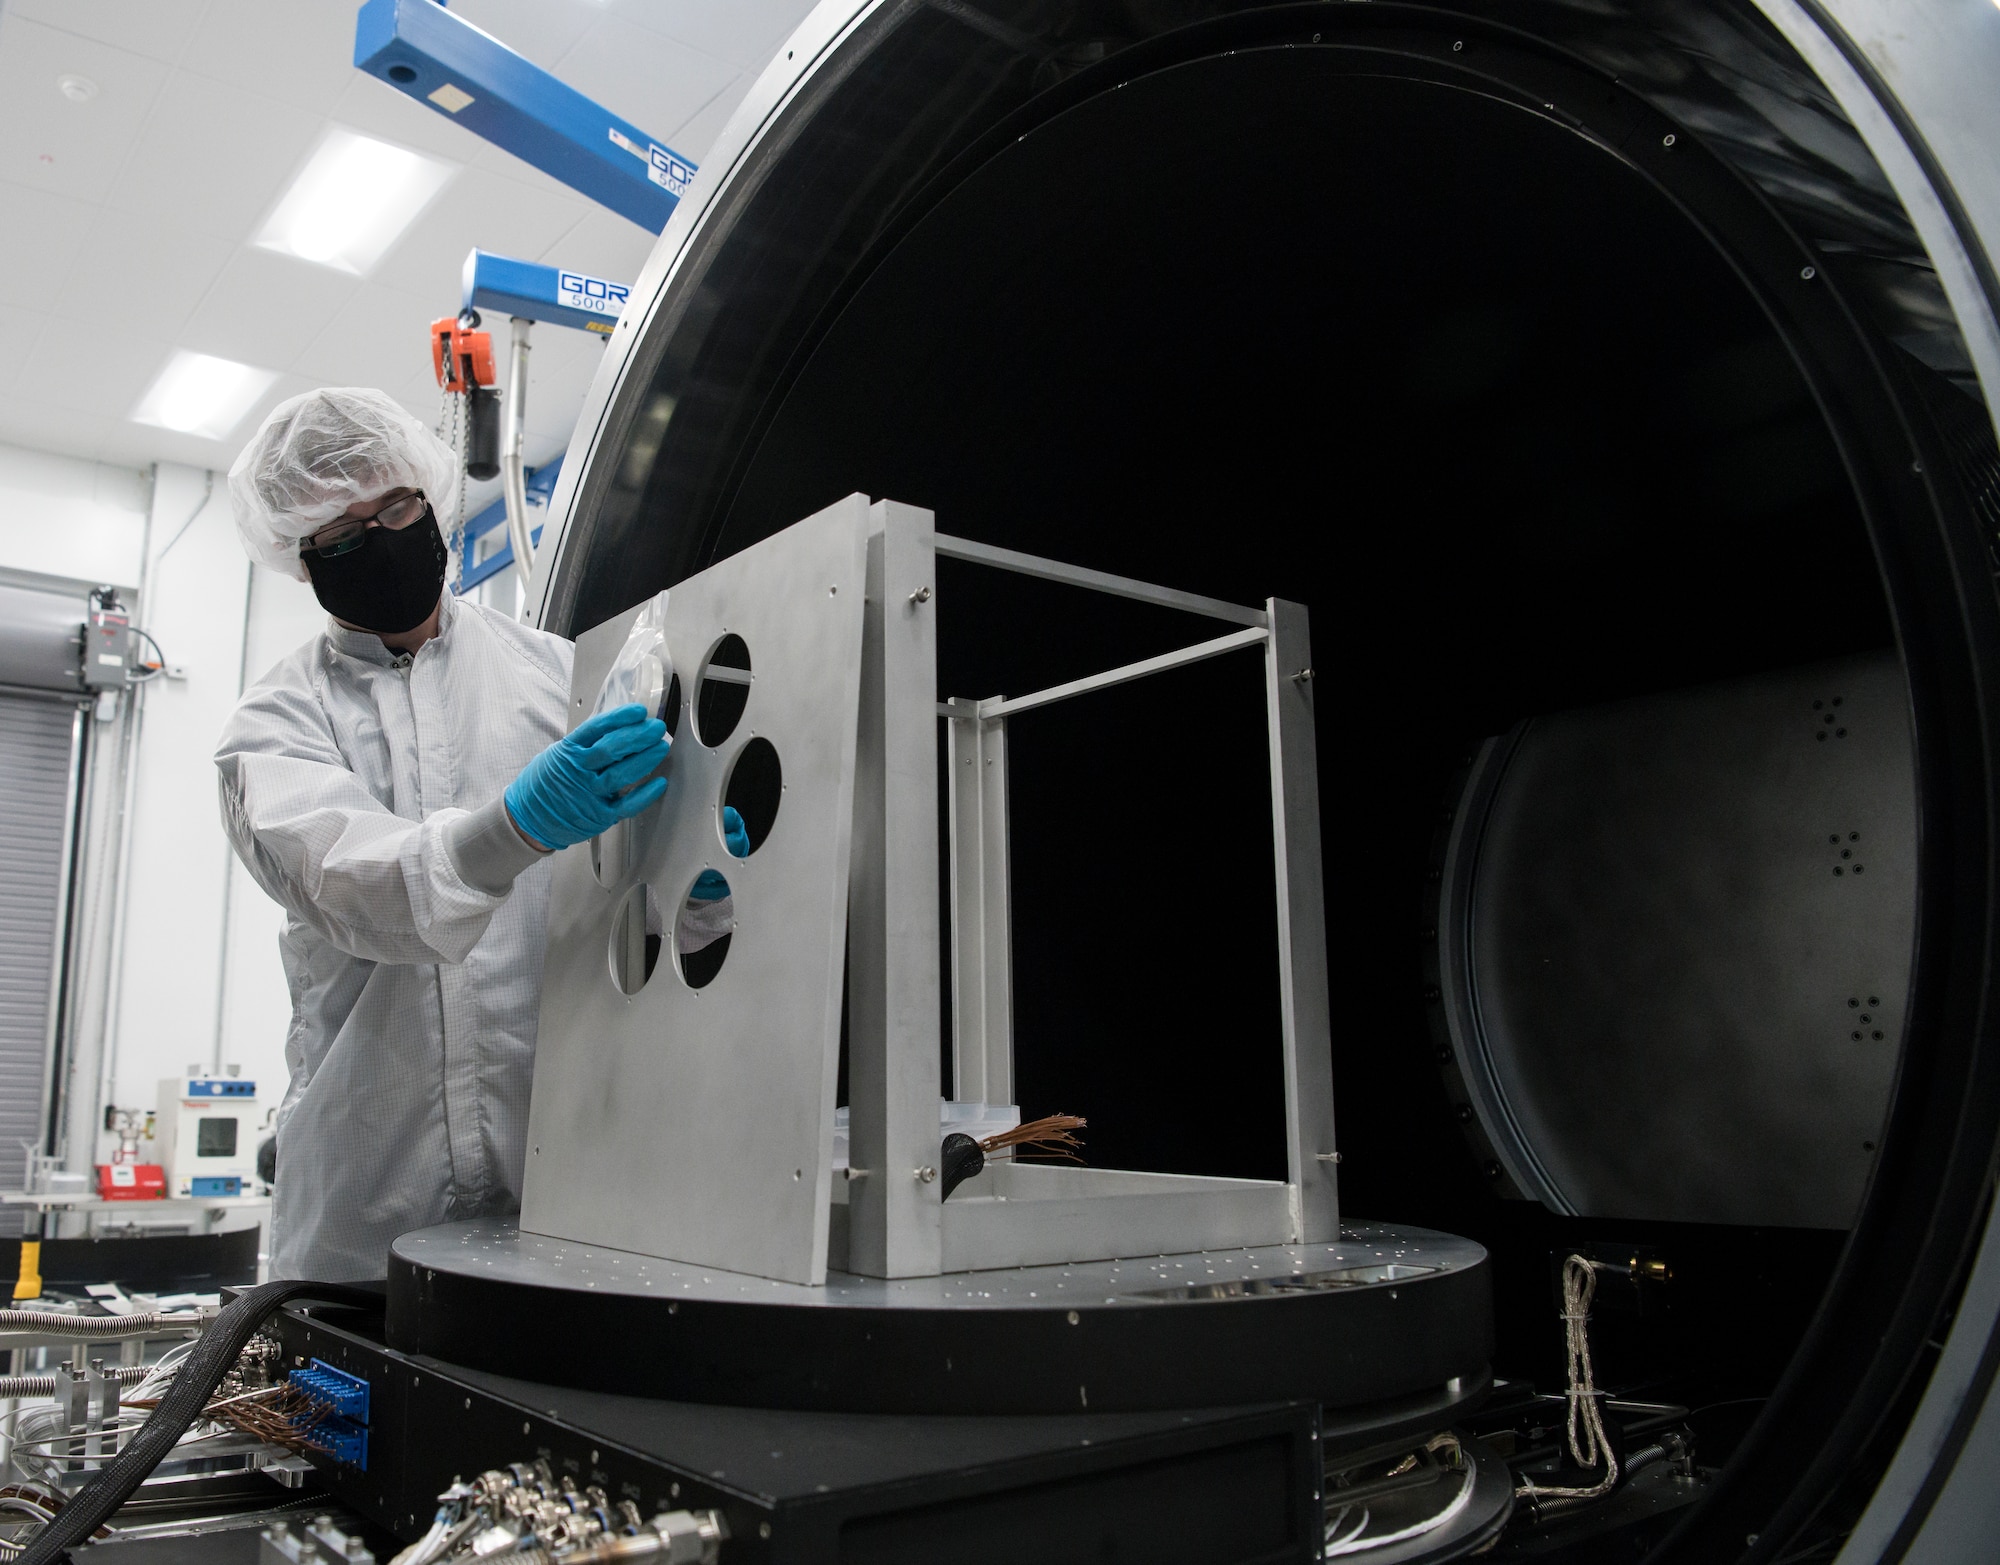 Eric D'Ambro, a test operations engineer, holds a material sample next to the frame that holds it in a Space Asset Resilience thermal vacuum chamber, Aug. 3, 2020, at Arnold Air Force Base, Tenn. The chamber can test the resiliency of materials and space systems under accurately simulated space conditions and natural threats. (U.S. Air Force photo by Jill Pickett)